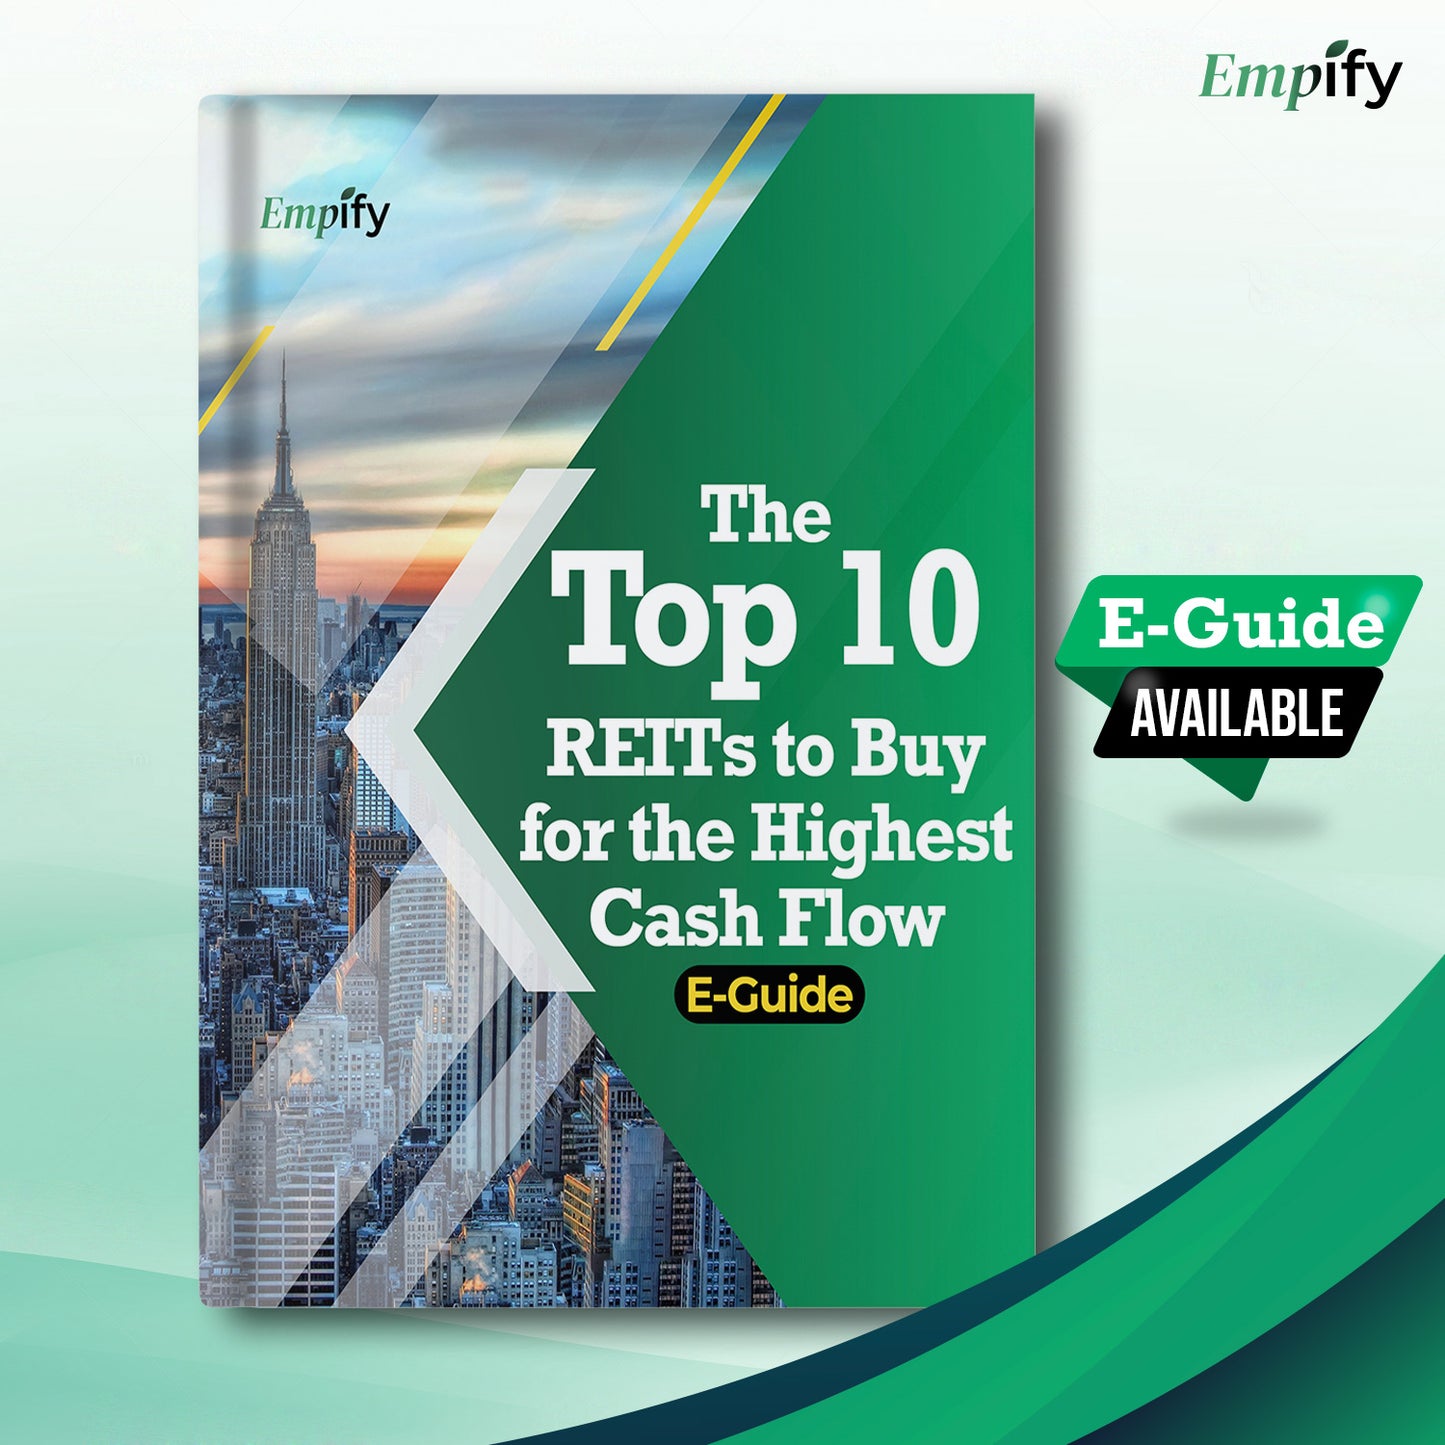 Top 10 REITs to Buy for the Highest Cash Flow E-Guide